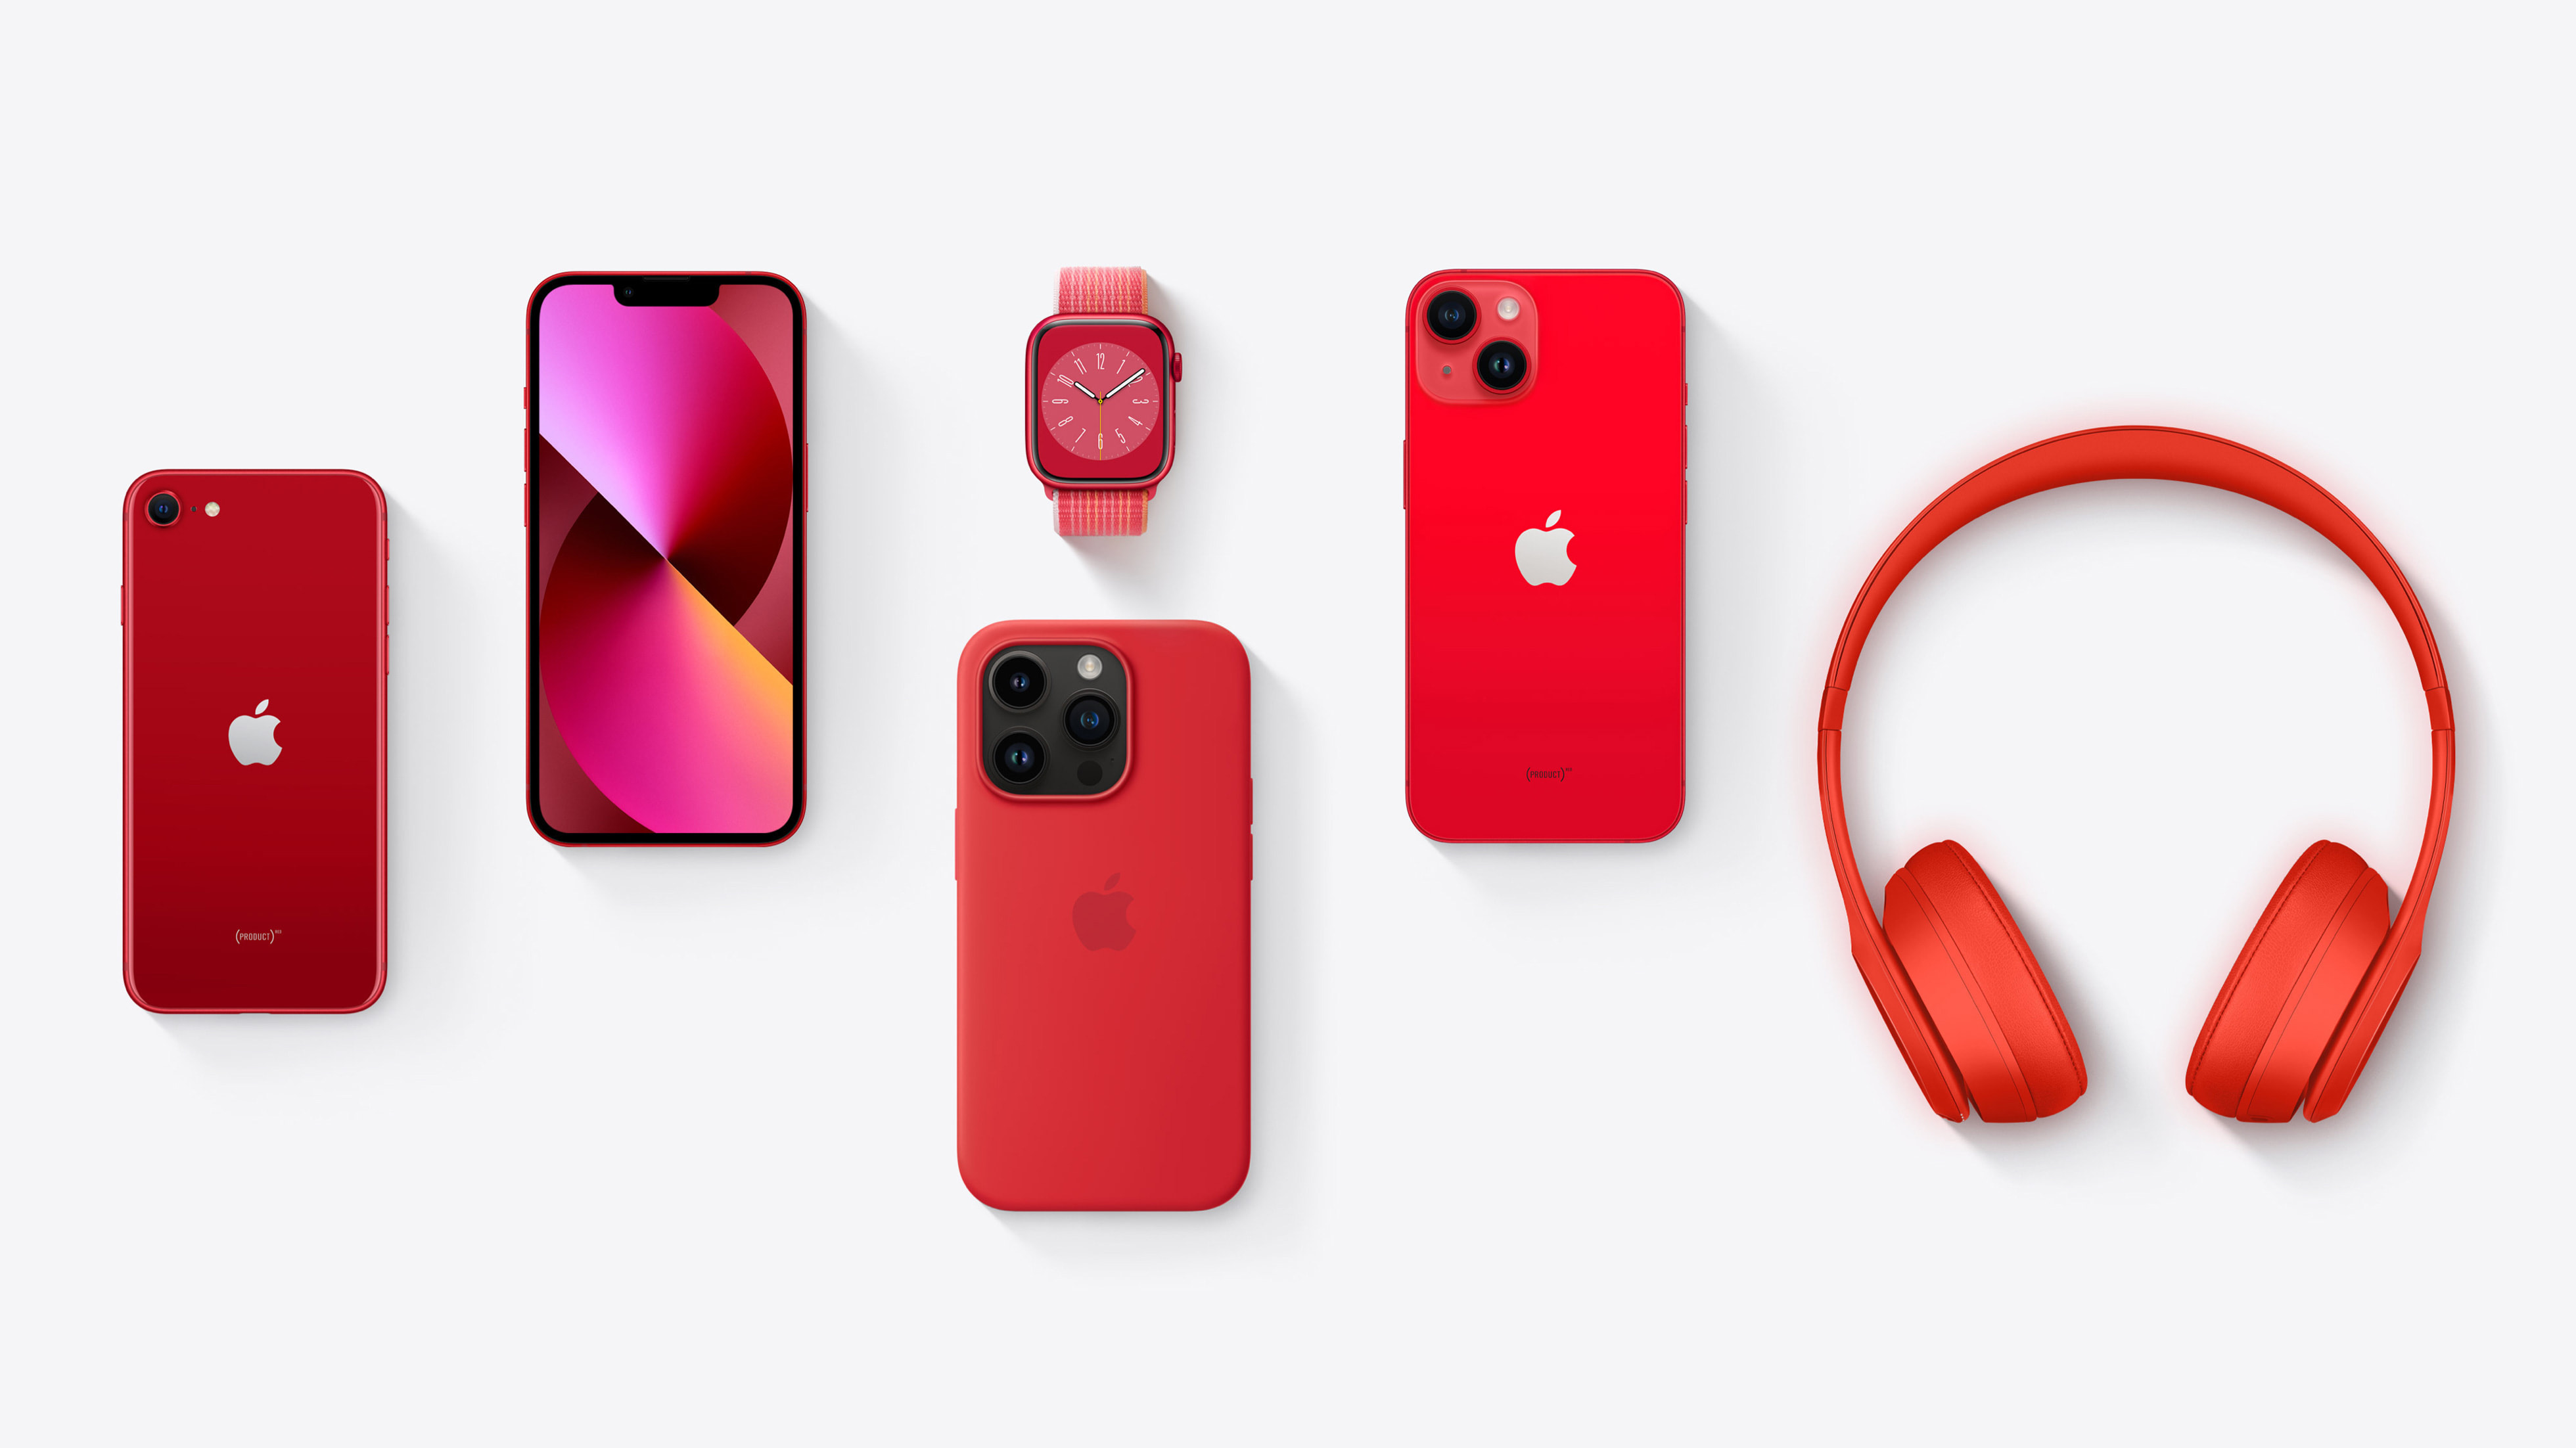 Apple turns (RED) to raise visibility for World AIDS Day - Apple (LV)